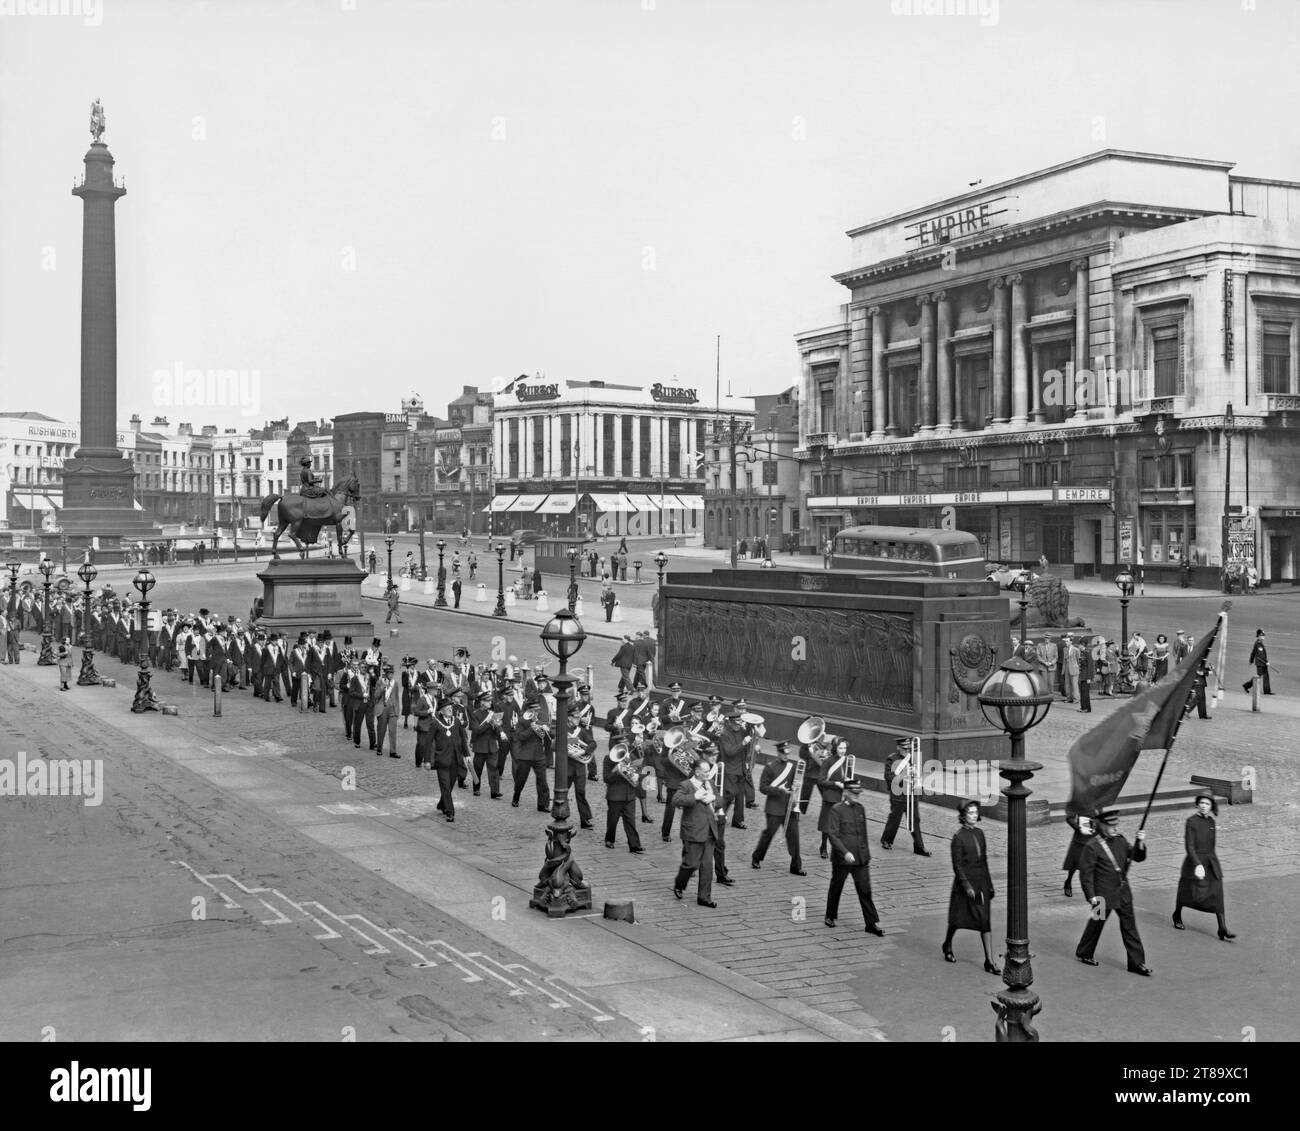 A march taking place in Lime Street, Liverpool, Merseyside, England, UK c.1950. The march is headed by the Salvation Army band, followed by Freemasons (holding aloft their symbols – such as the all-seeing eye, the beehive and blazing star). They walk alongside the steps of St Georges Hall, passing Wellington’s Column (left), the Queen Victoria Equestrian statue (centre) and the Liverpool Cenotaph (right). Behind is the Liverpool Empire Theatre (opened in 1925). A poster indicates that the American group The Ink Spots were to appear at the venue – a vintage 1940s/50s photograph. Stock Photo